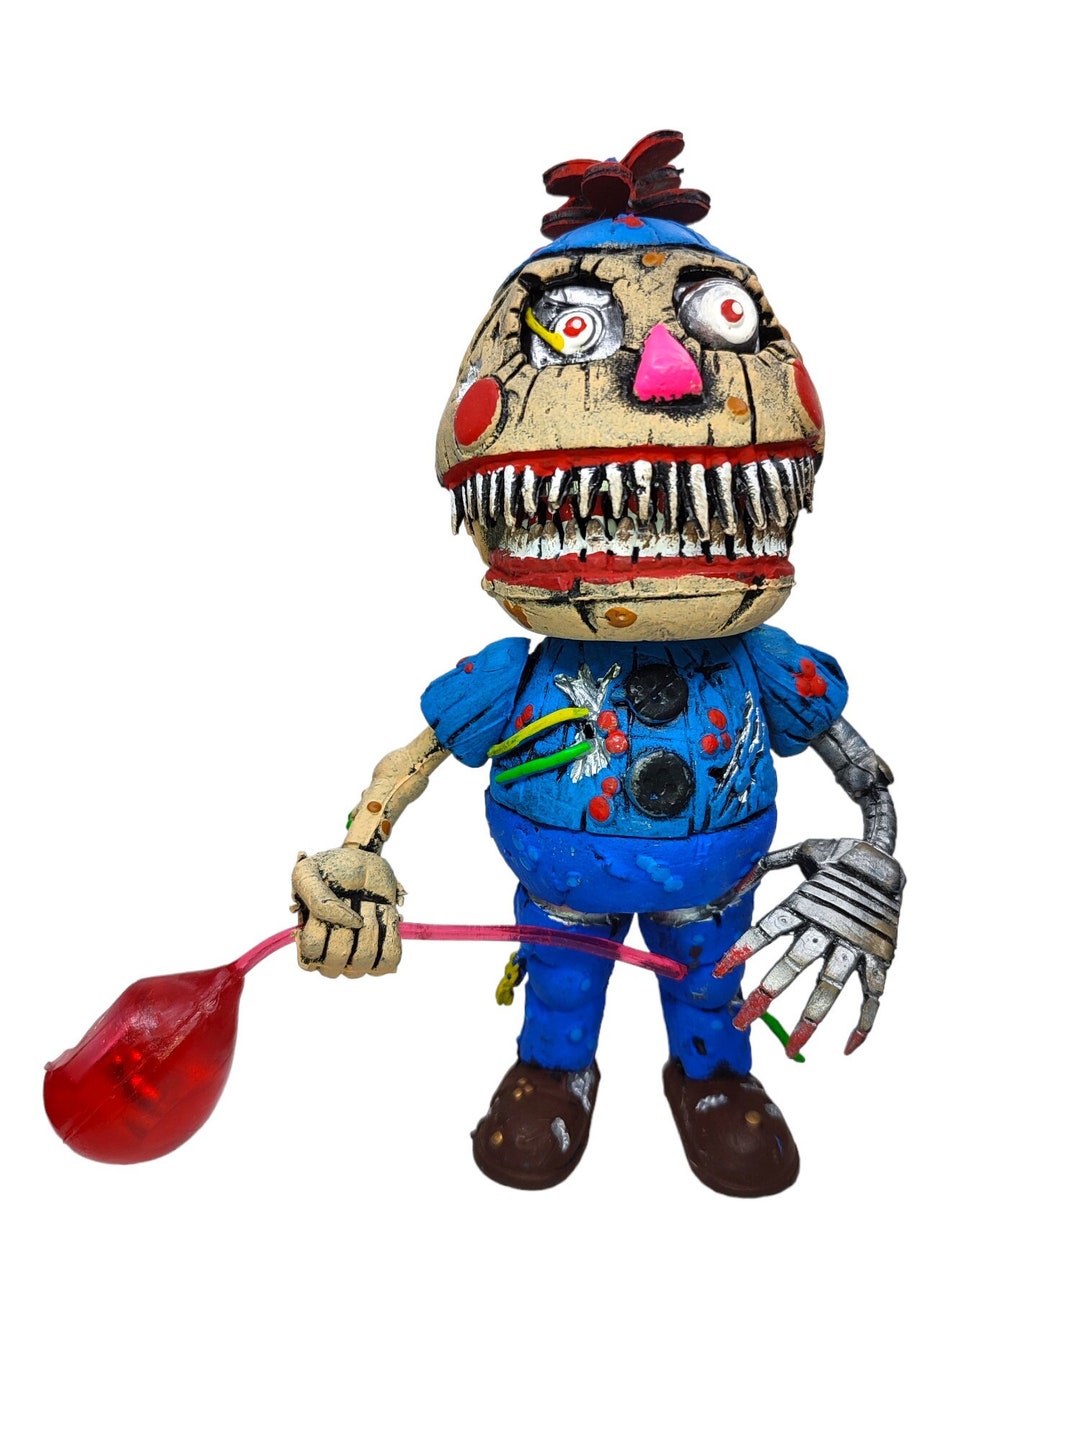 FNAF Bonnie blue 8 hard plastic mexican toy figure Five Nights At